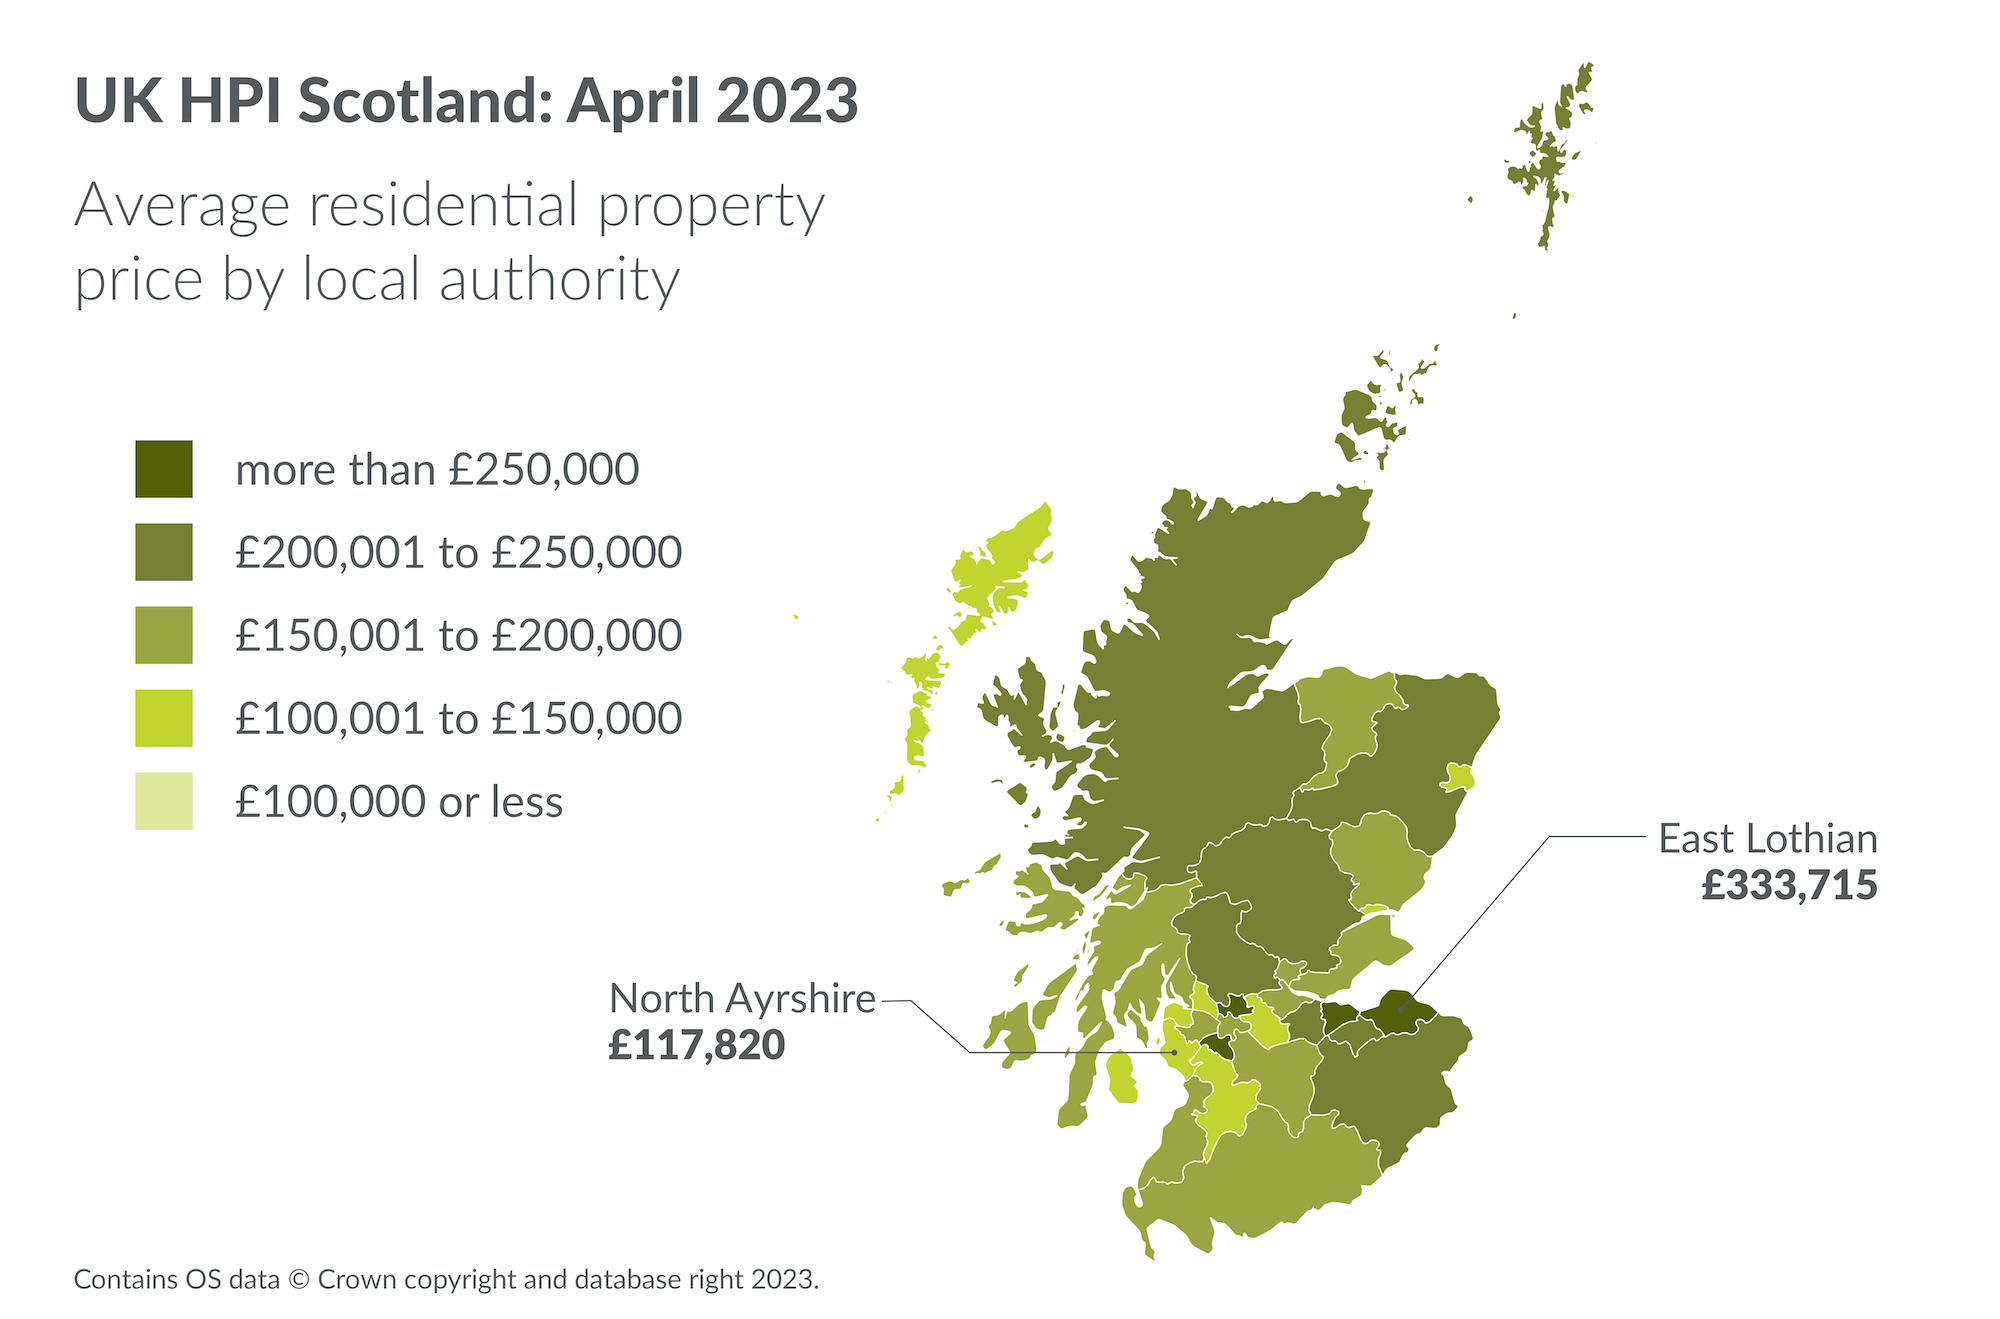 Scotland's house prices rise amid declining sales volume